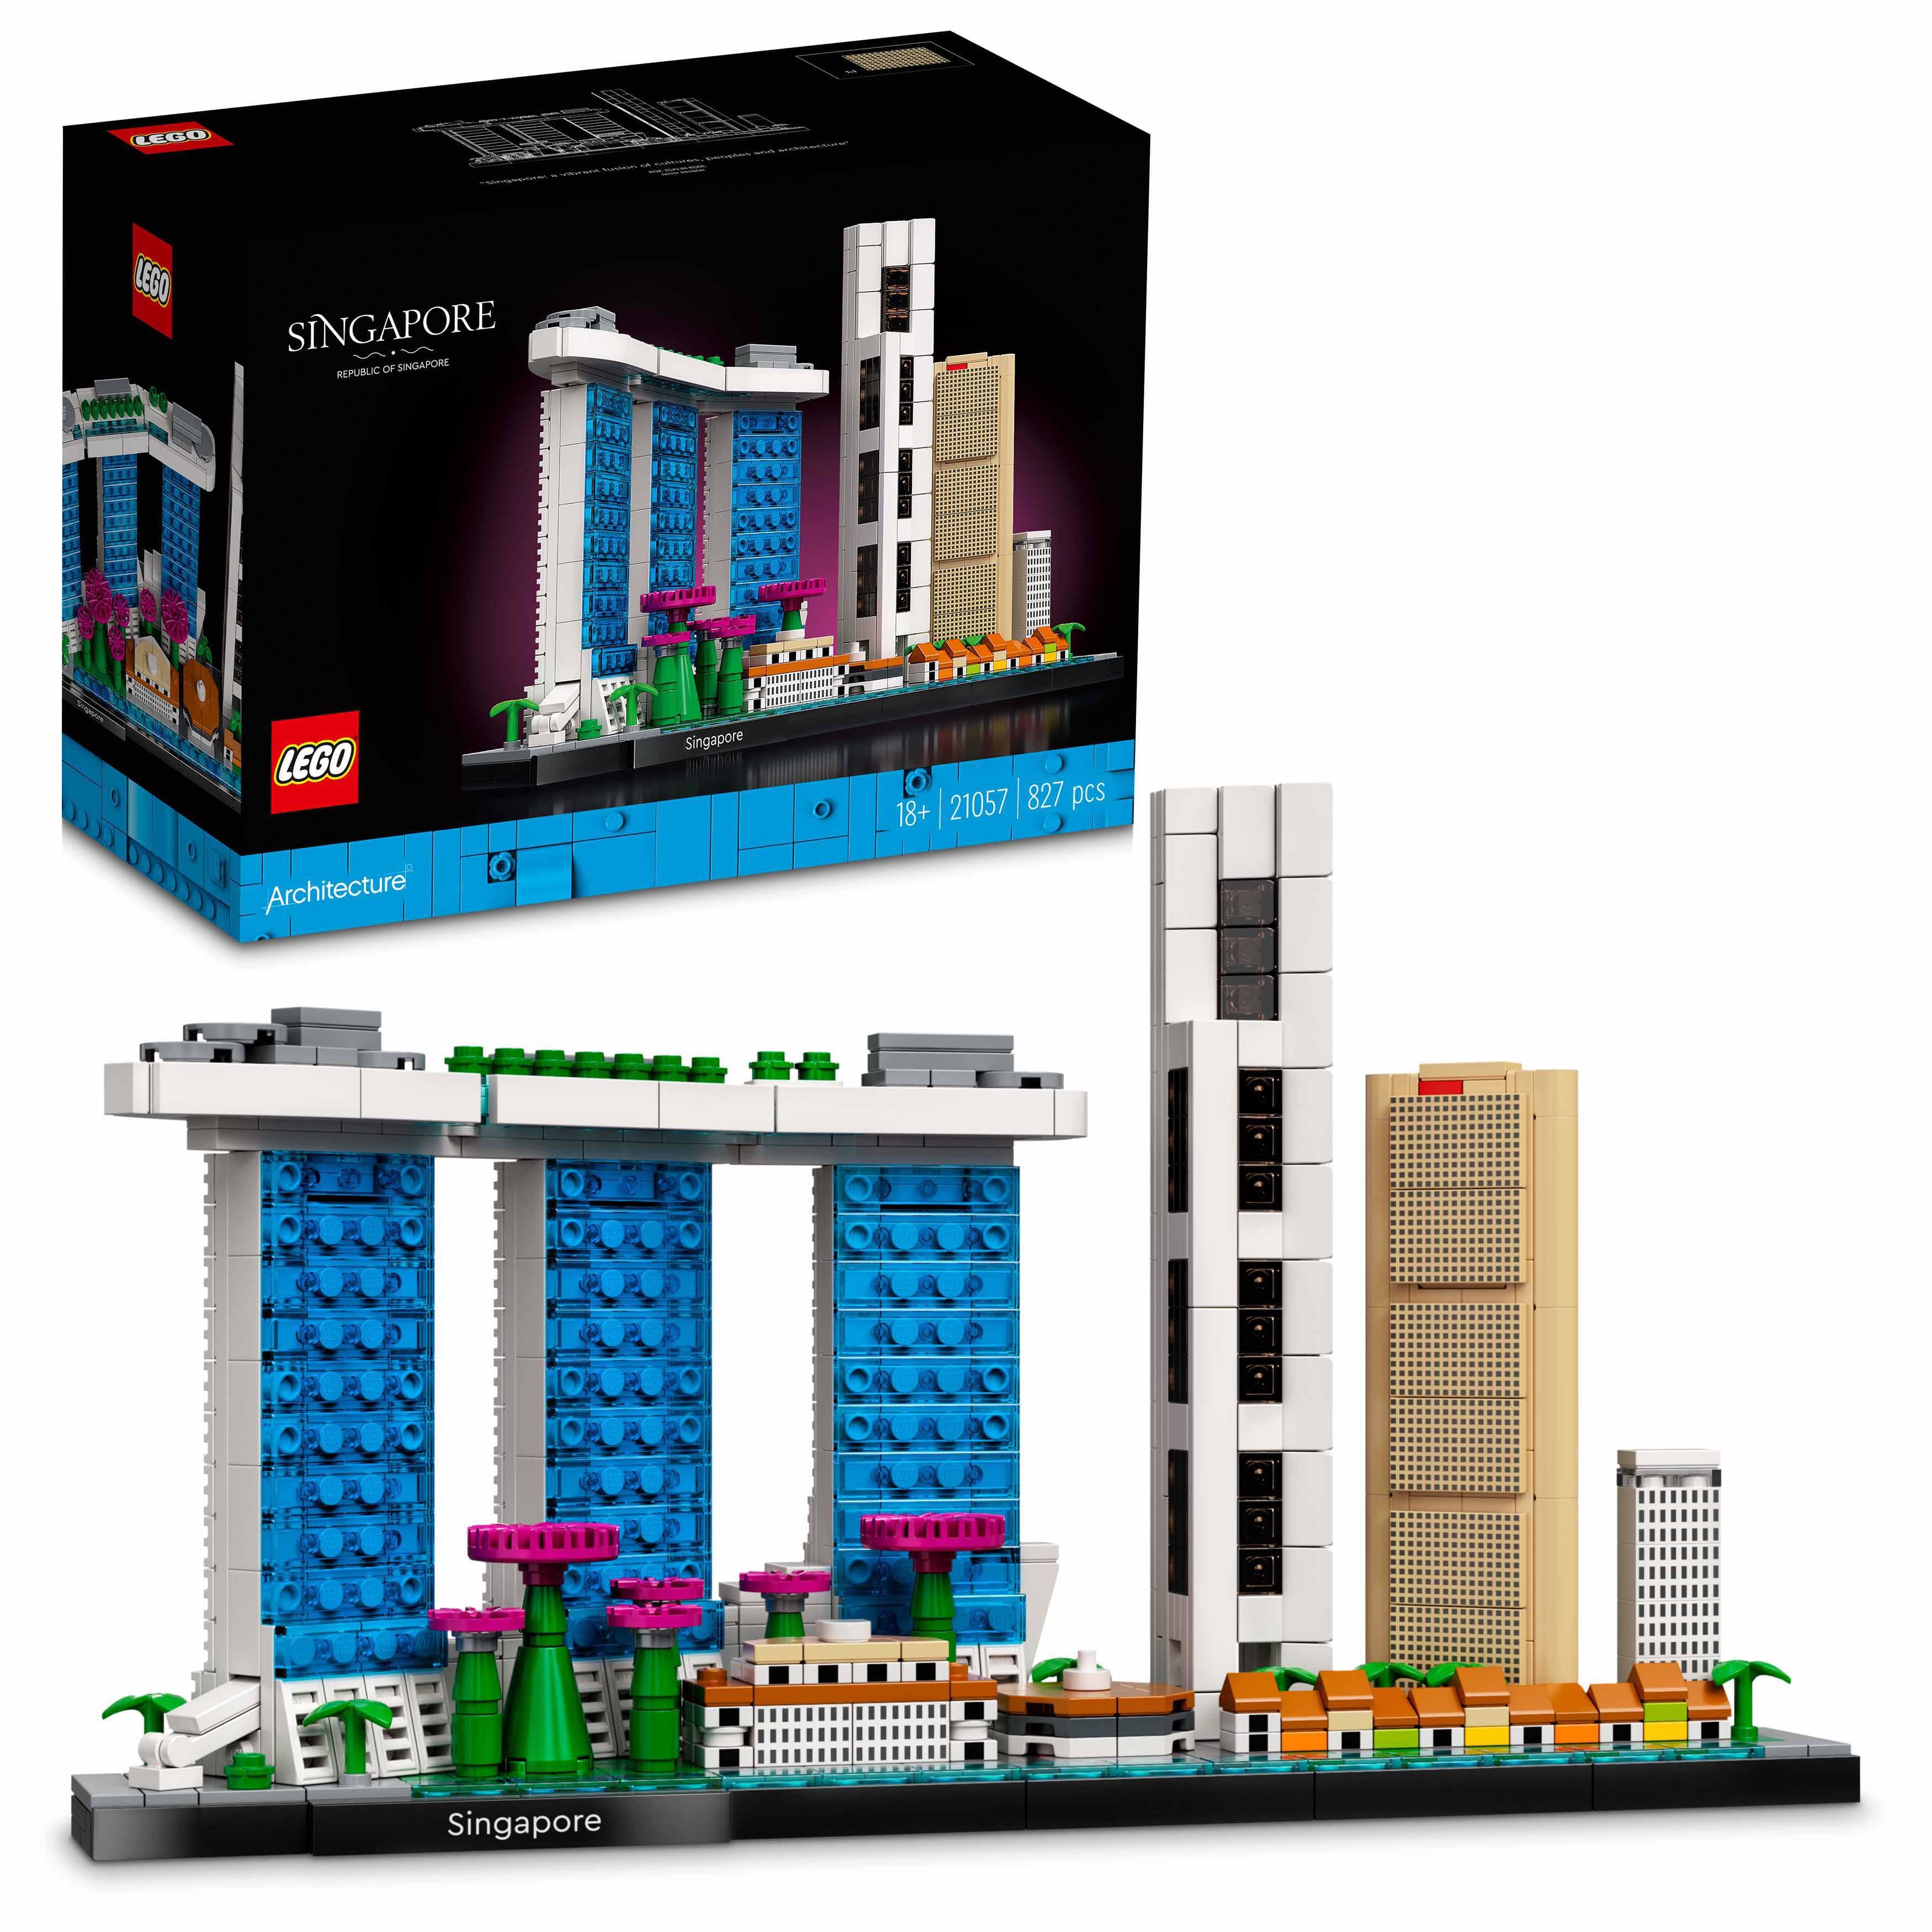 LEGO 21057 Architecture Singapore Model Building Set for Adults, Skyline Collection, Collectible Crafts Construction, Home Décor Gift Idea